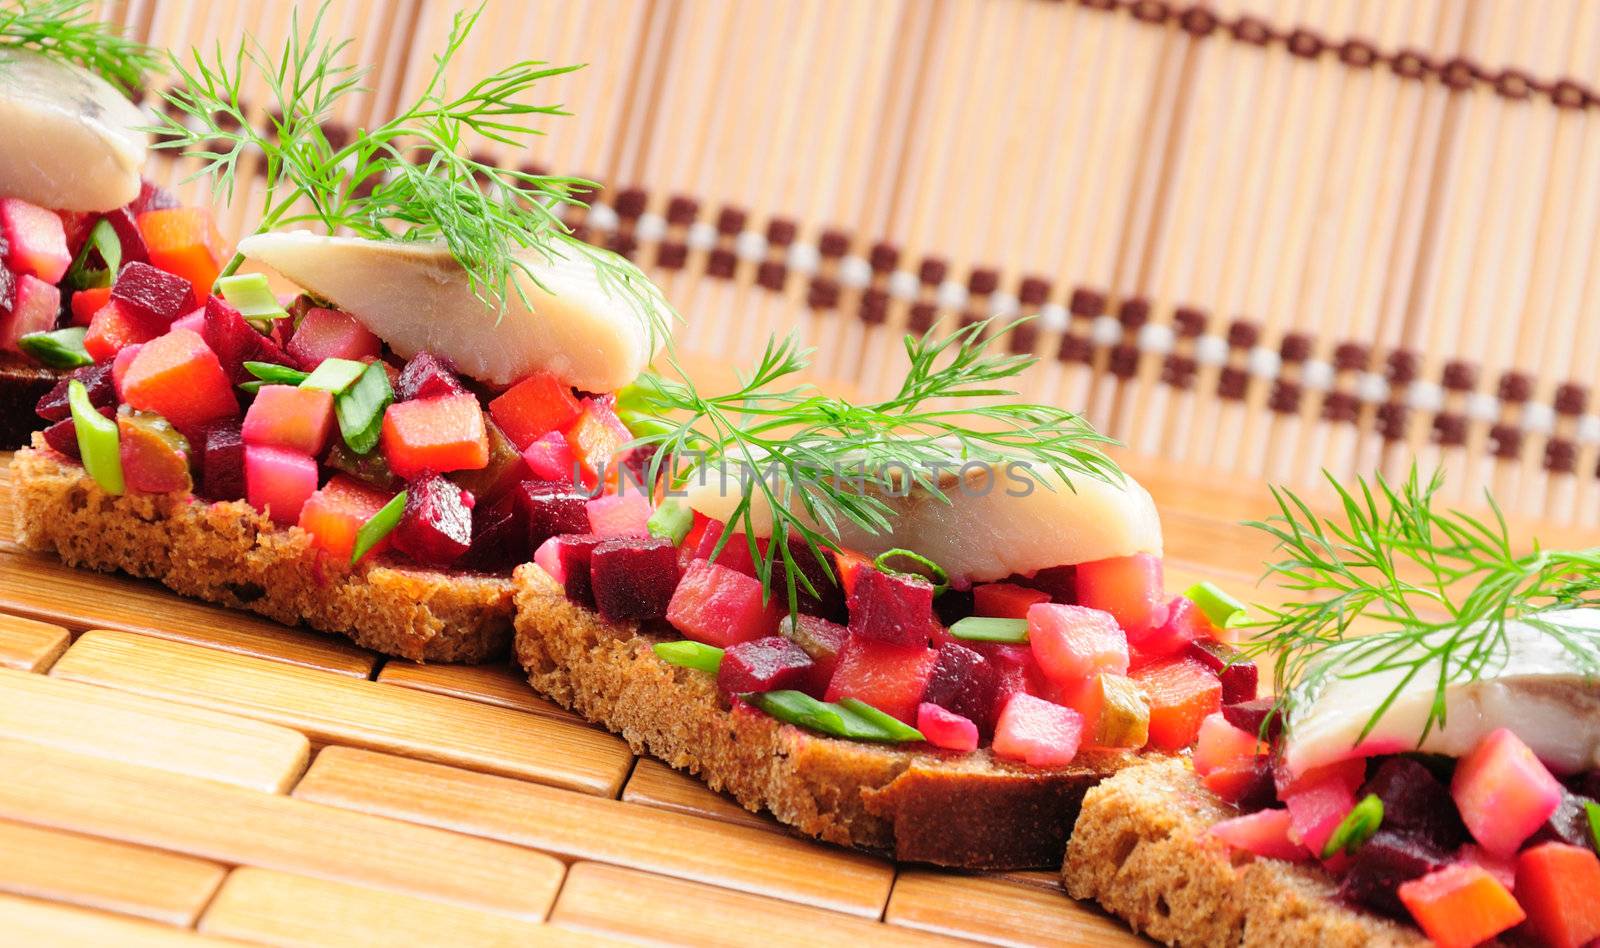 Sandwiches with rye bread, herring and vegetables by Apolonia